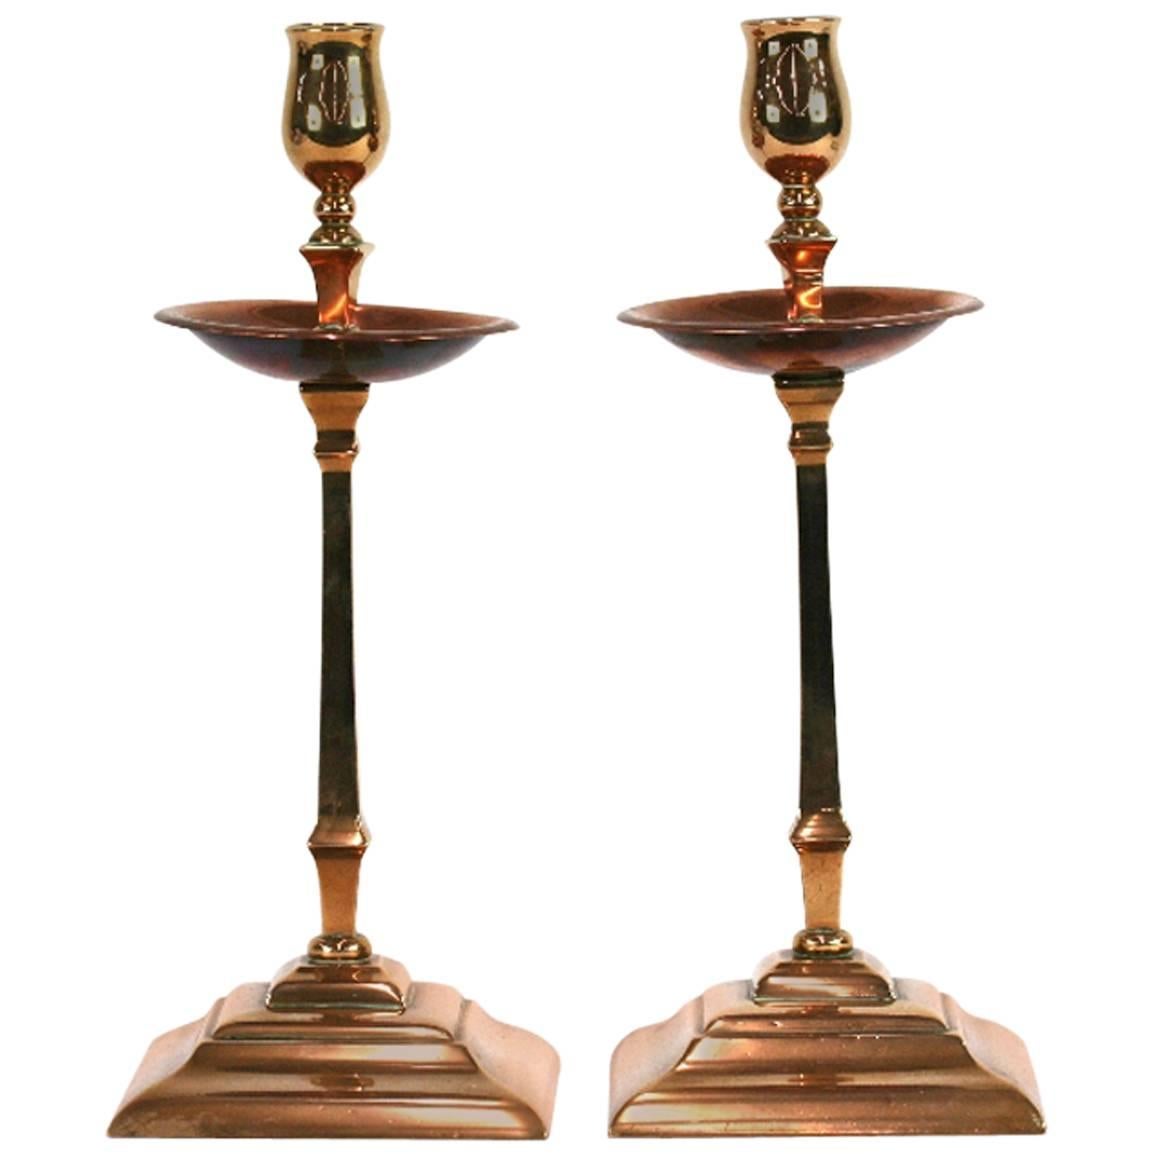 Pair of Copper and Brass Candlesticks, by W A S Benson